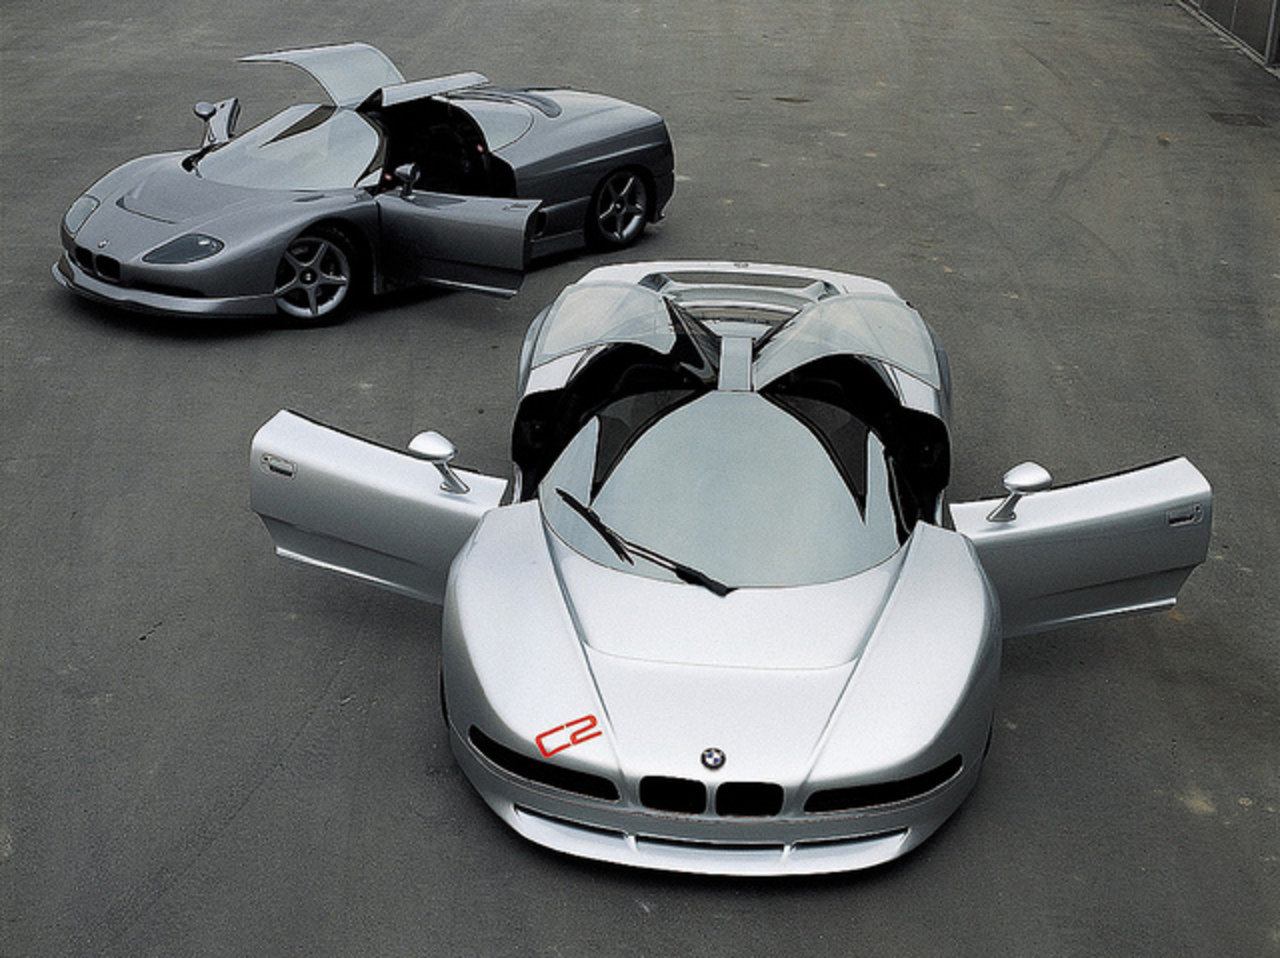 BMW Nazca C2 and M12 | Flickr - Photo Sharing!